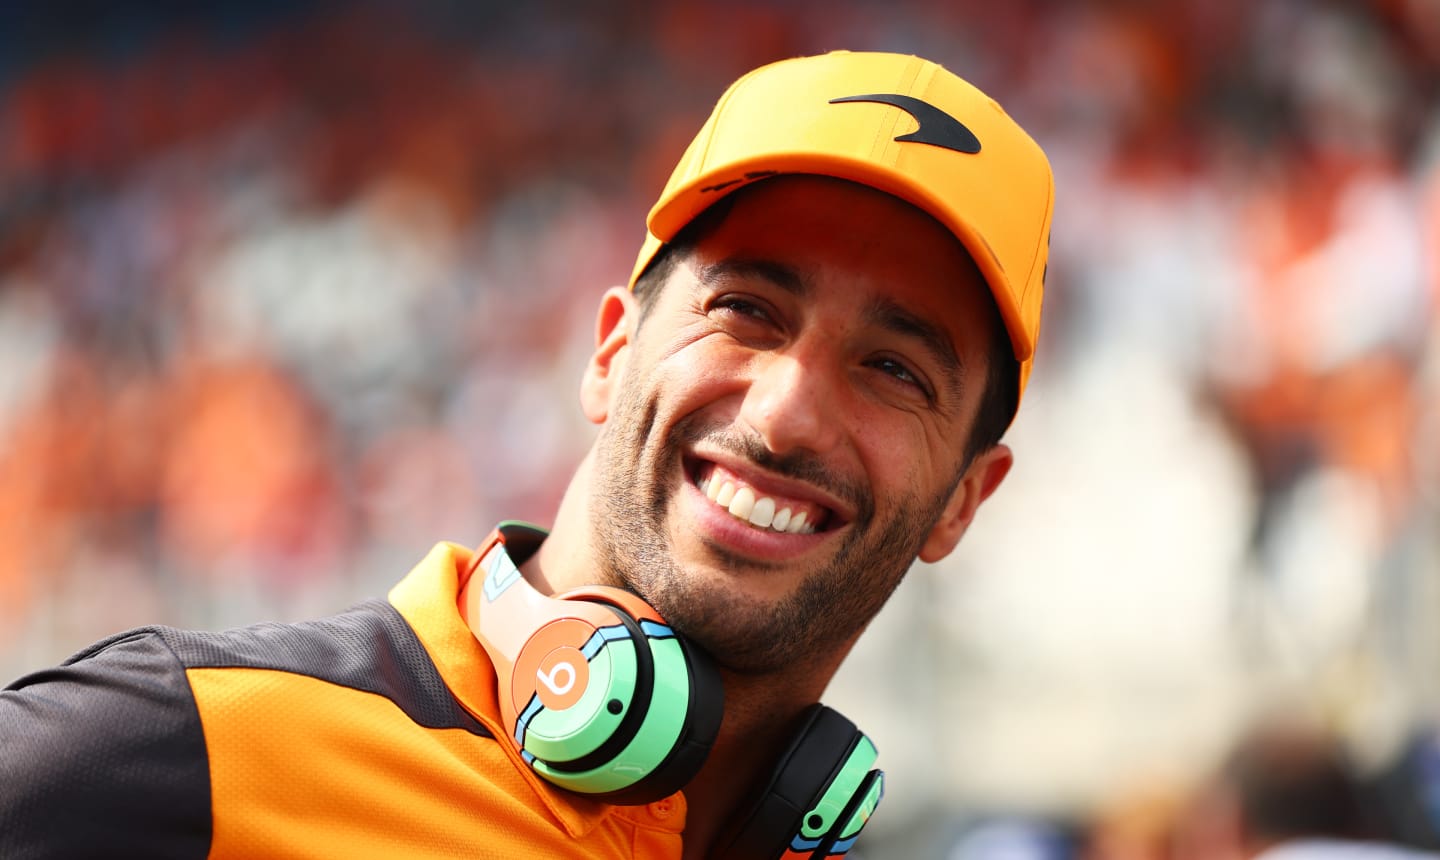 ZANDVOORT, NETHERLANDS - SEPTEMBER 04: Daniel Ricciardo of Australia and McLaren looks on from the drivers parade prior to the F1 Grand Prix of The Netherlands at Circuit Zandvoort on September 04, 2022 in Zandvoort, Netherlands. (Photo by Alex Pantling - Formula 1/Formula 1 via Getty Images)